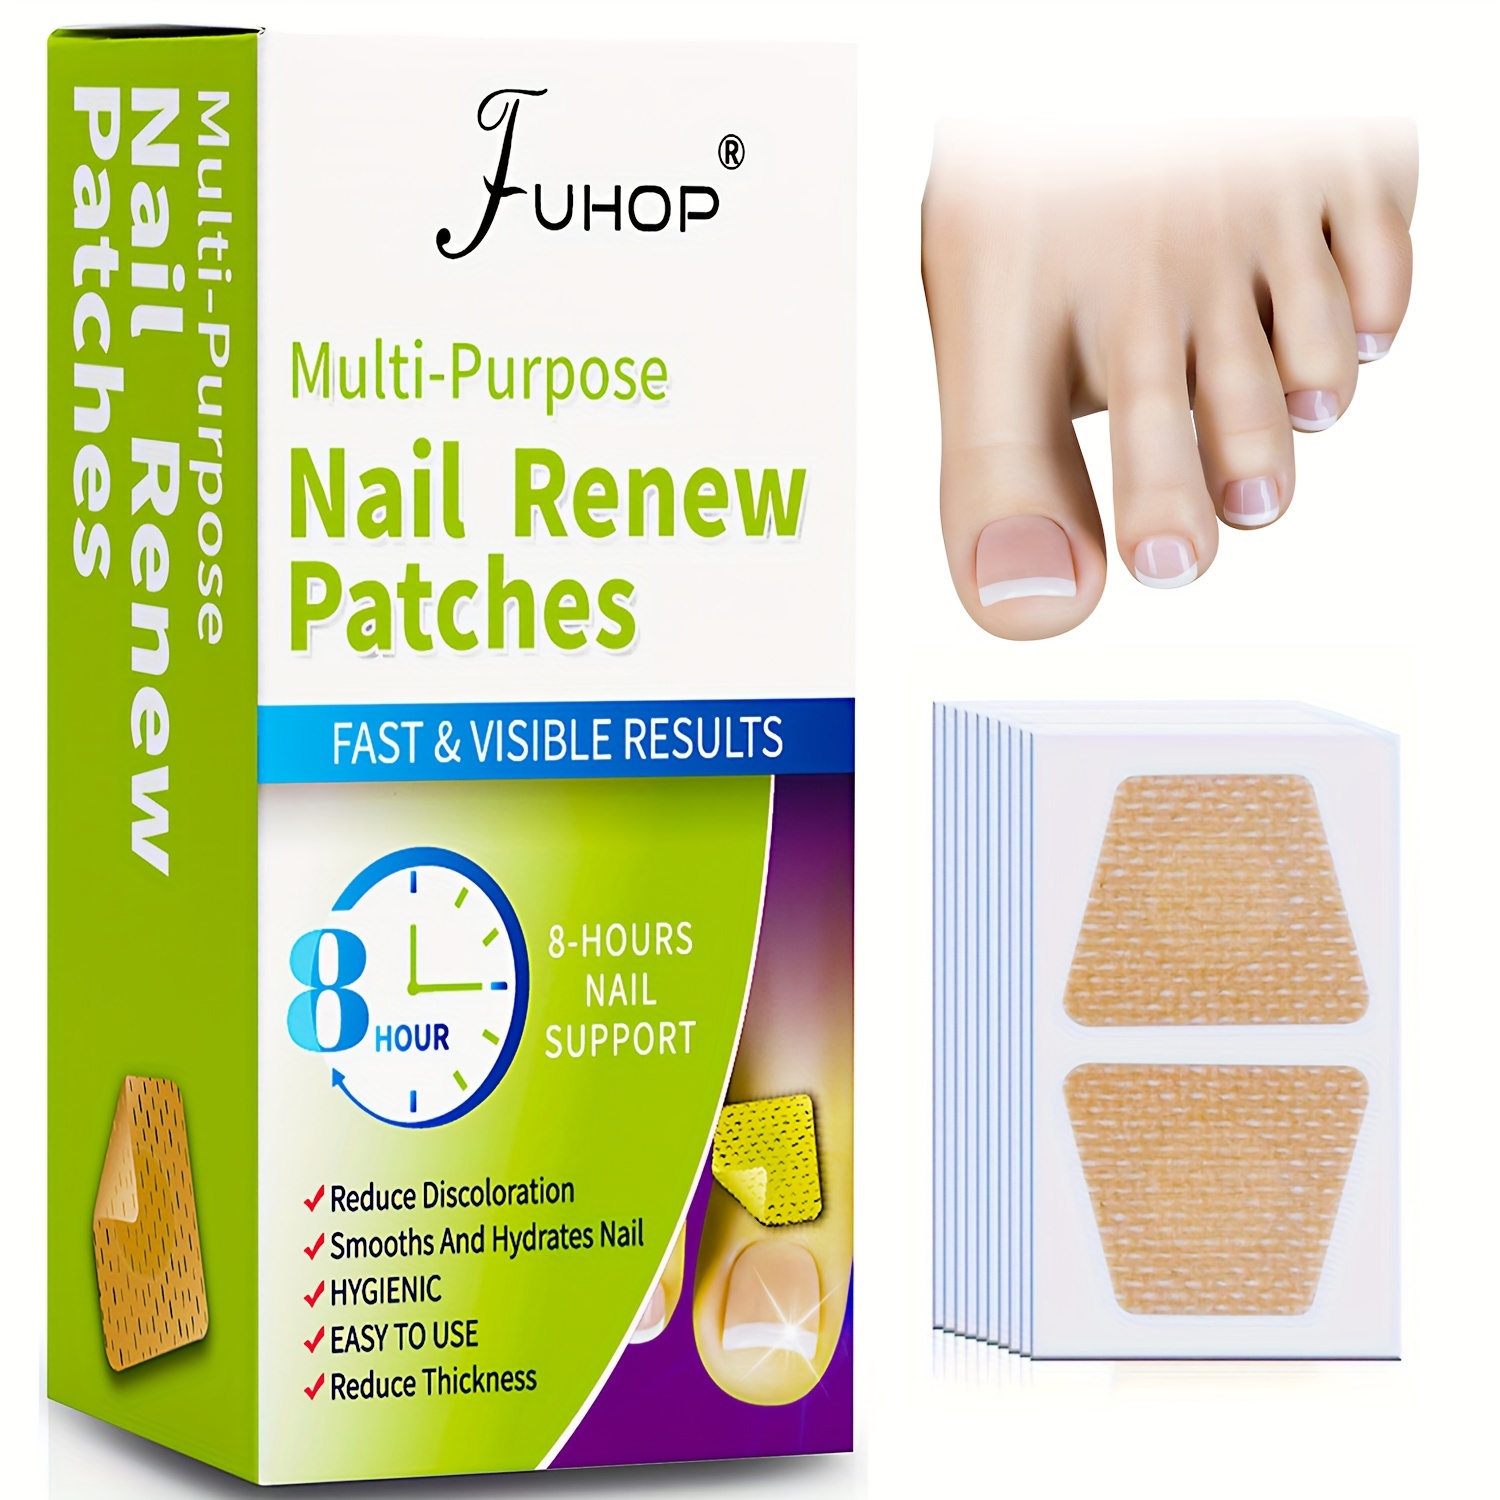 

64pcs Nail Renewal Patches, Multi-purpose Toe & Fingernail Care, Fast-acting For Damaged And Discolored Nails, With Garlic Extract & Tea Tree Oil, 8-hour Hydration & Protection